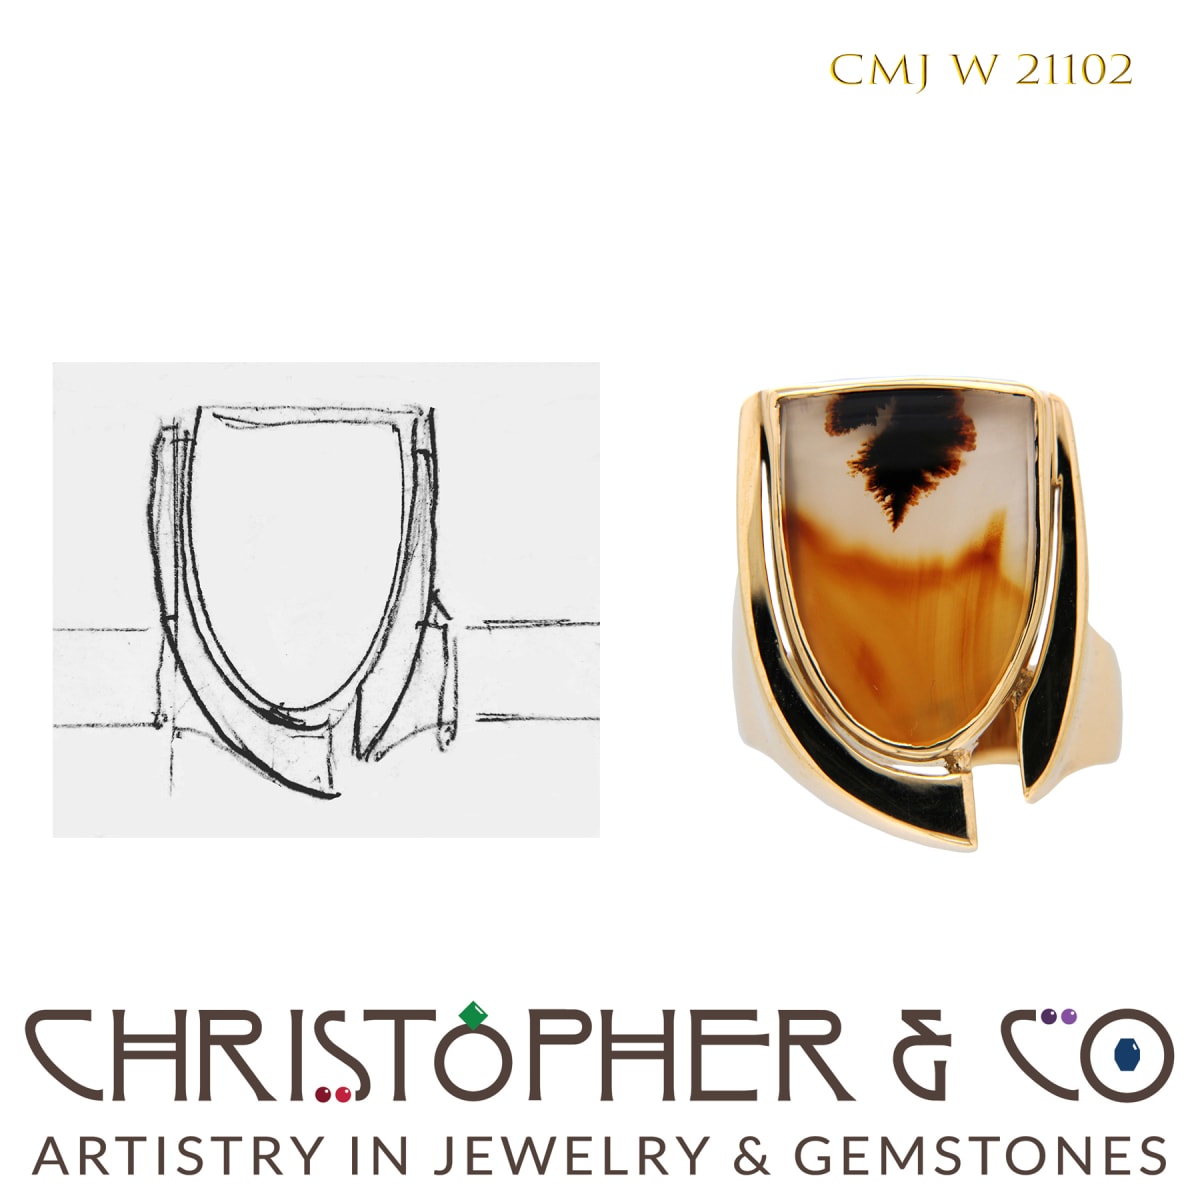 CMJ W 21102  Gold Ring designed by Christopher M. Jupp set with agate.  Image: CMJ W 21102  Gold Ring designed by Christopher M. Jupp set with agate.